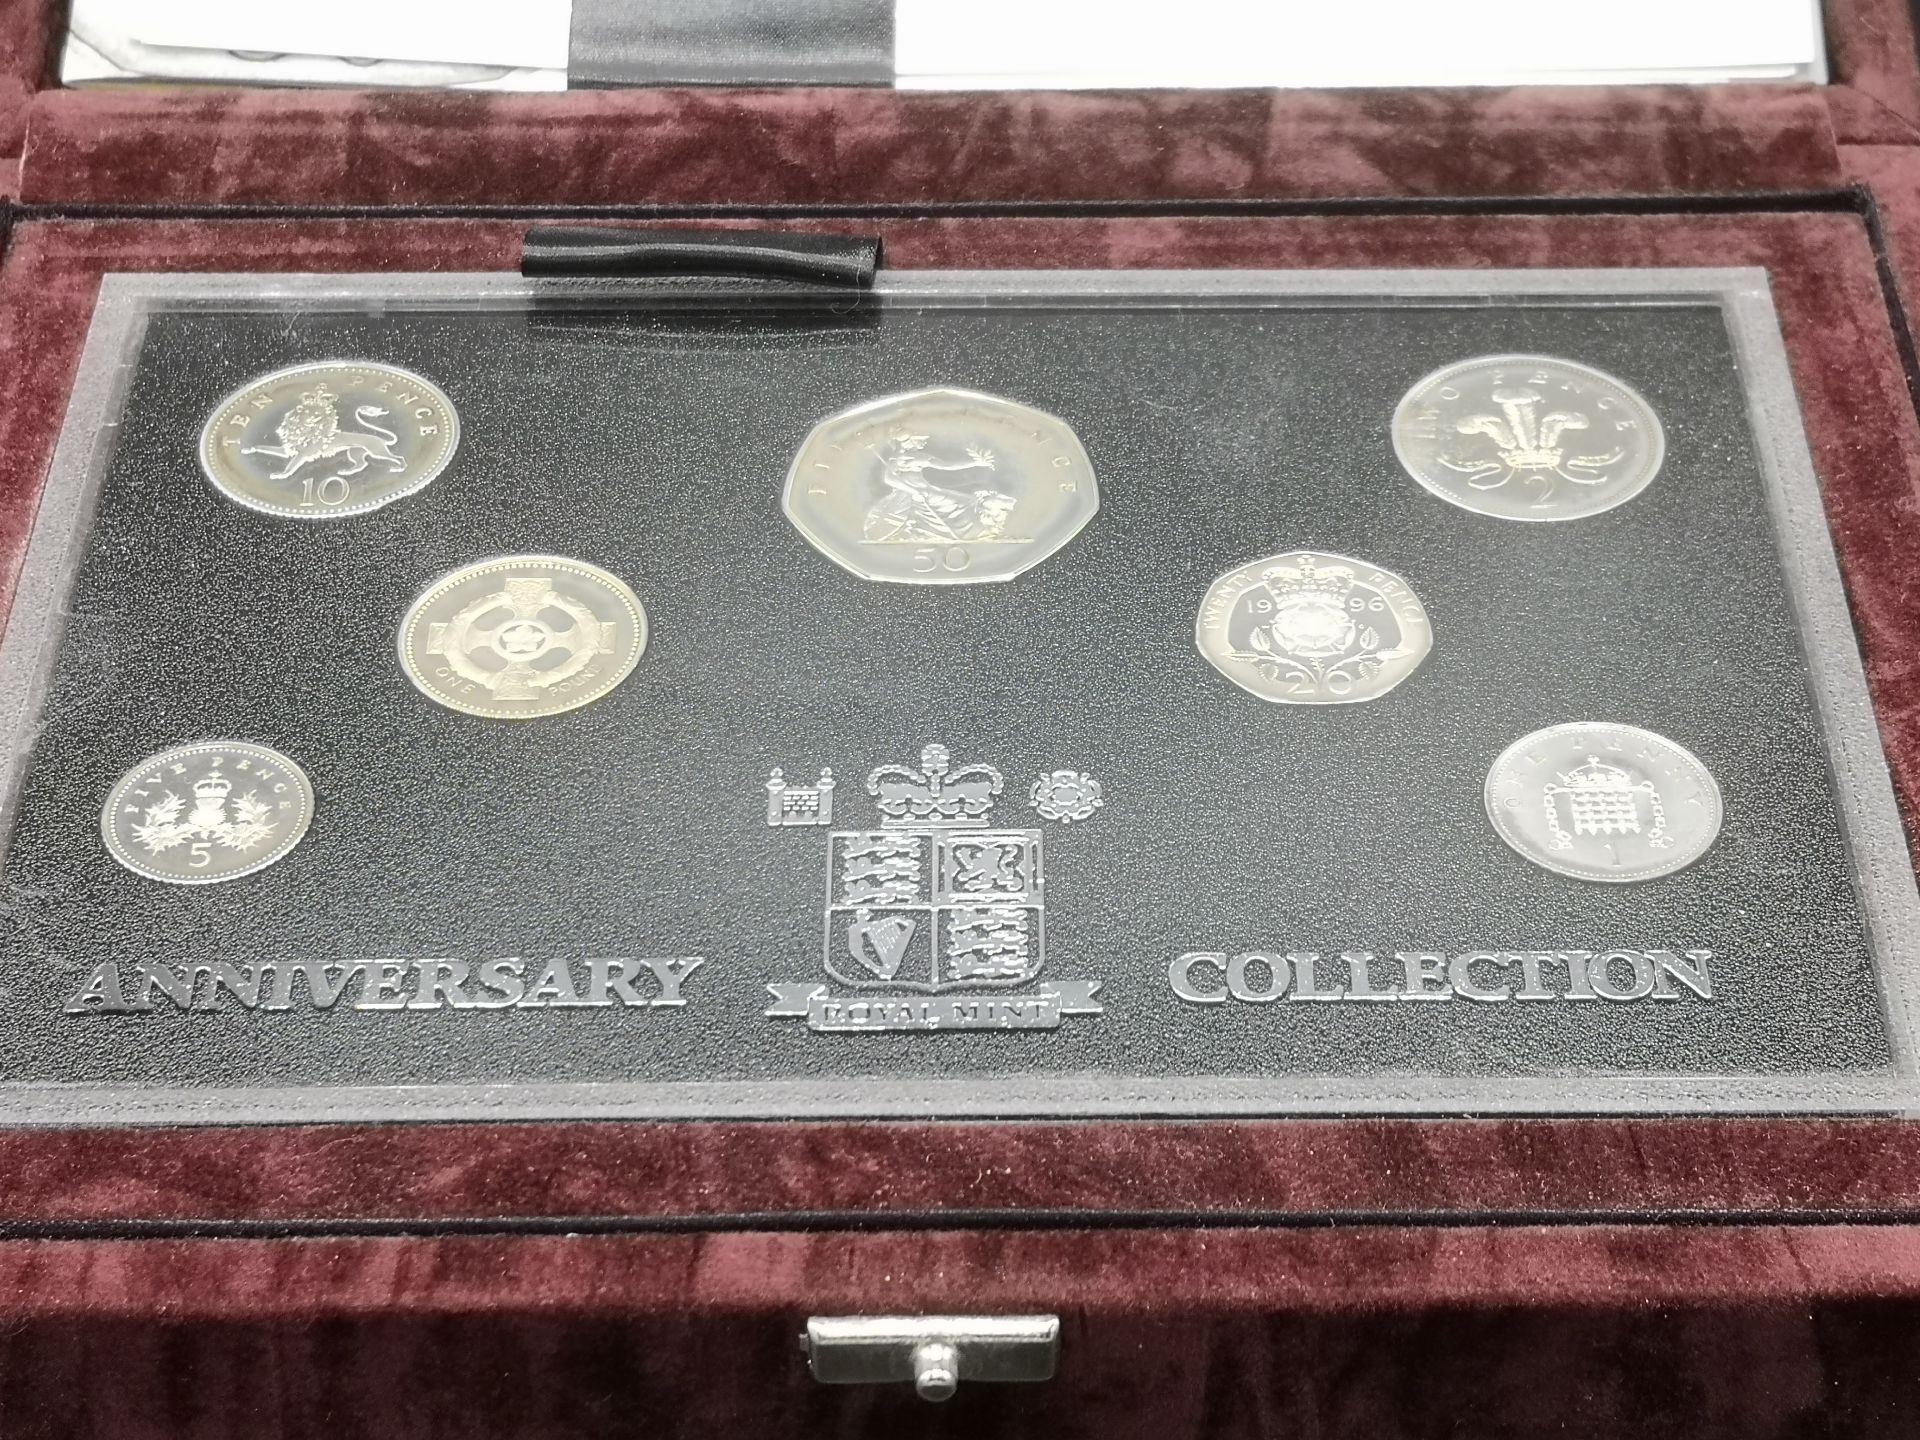 Elizabeth II Royal Mint silver Proof anniversary collection, 1996 - Image 5 of 6